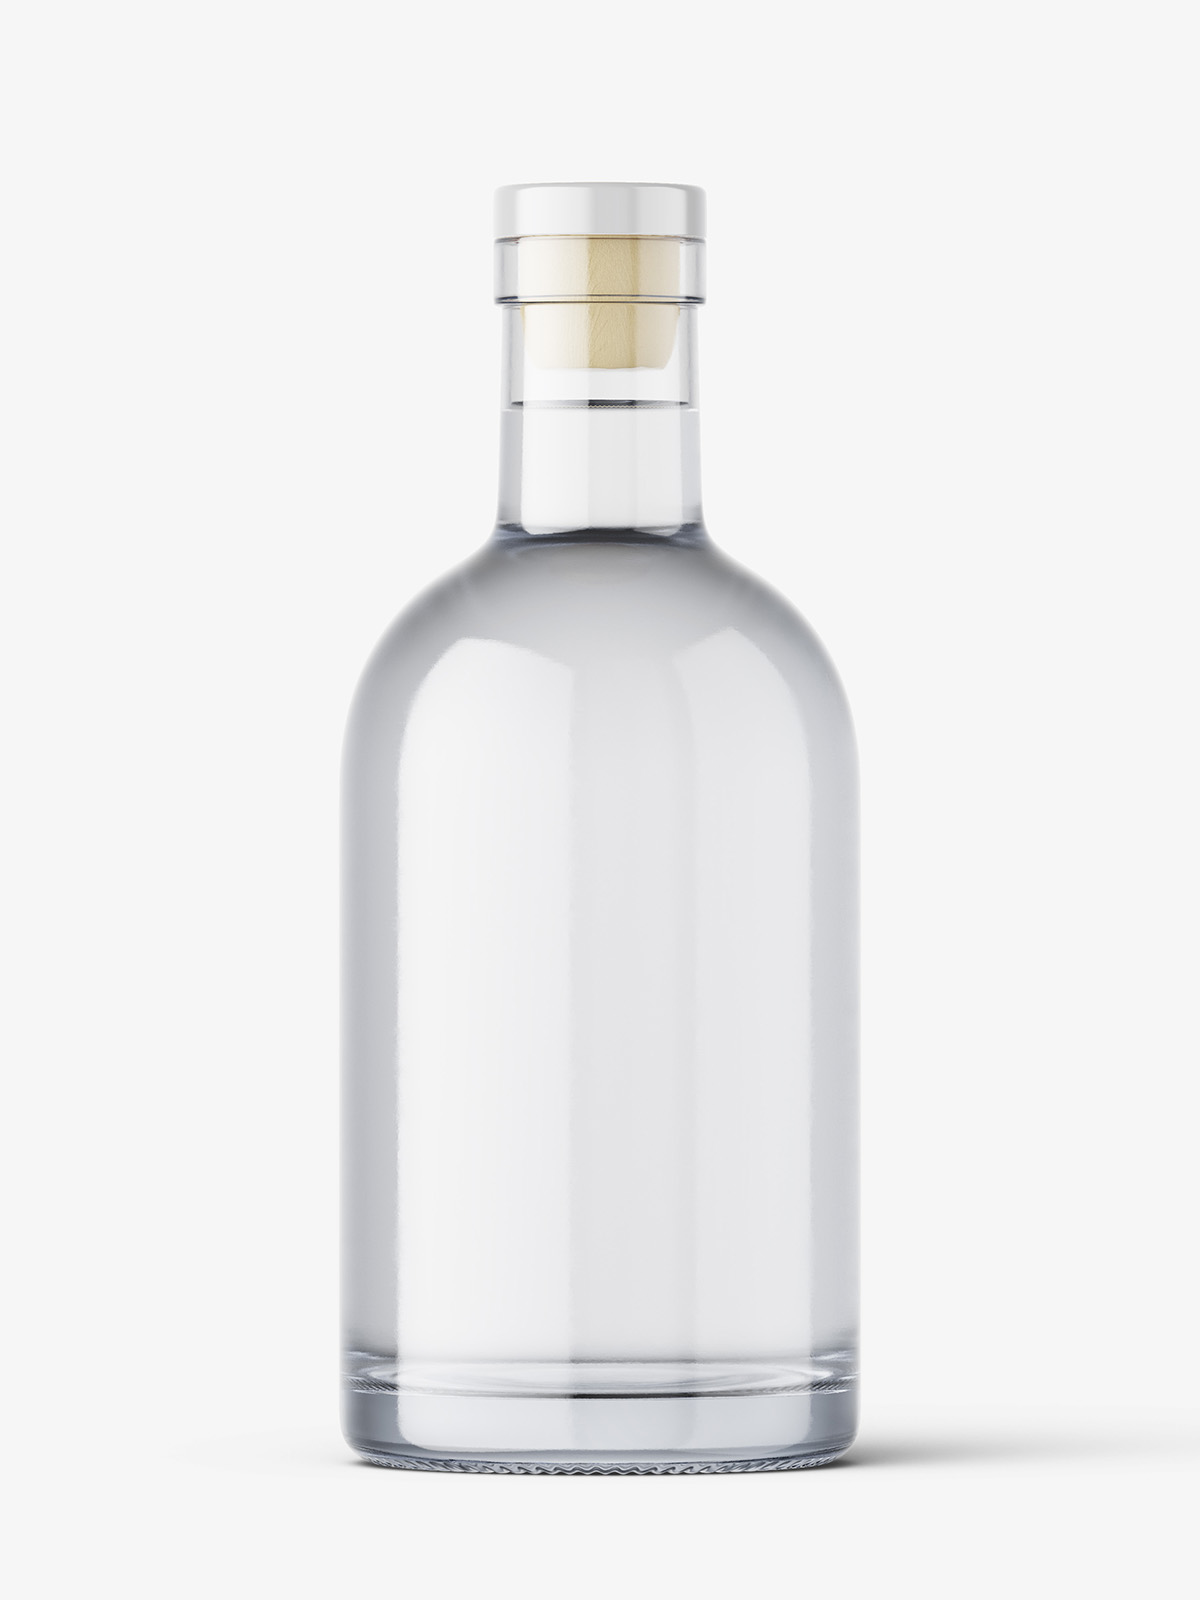 Download Clear Glass Liquor Bottle Mockup Front View : Clear Glass ...